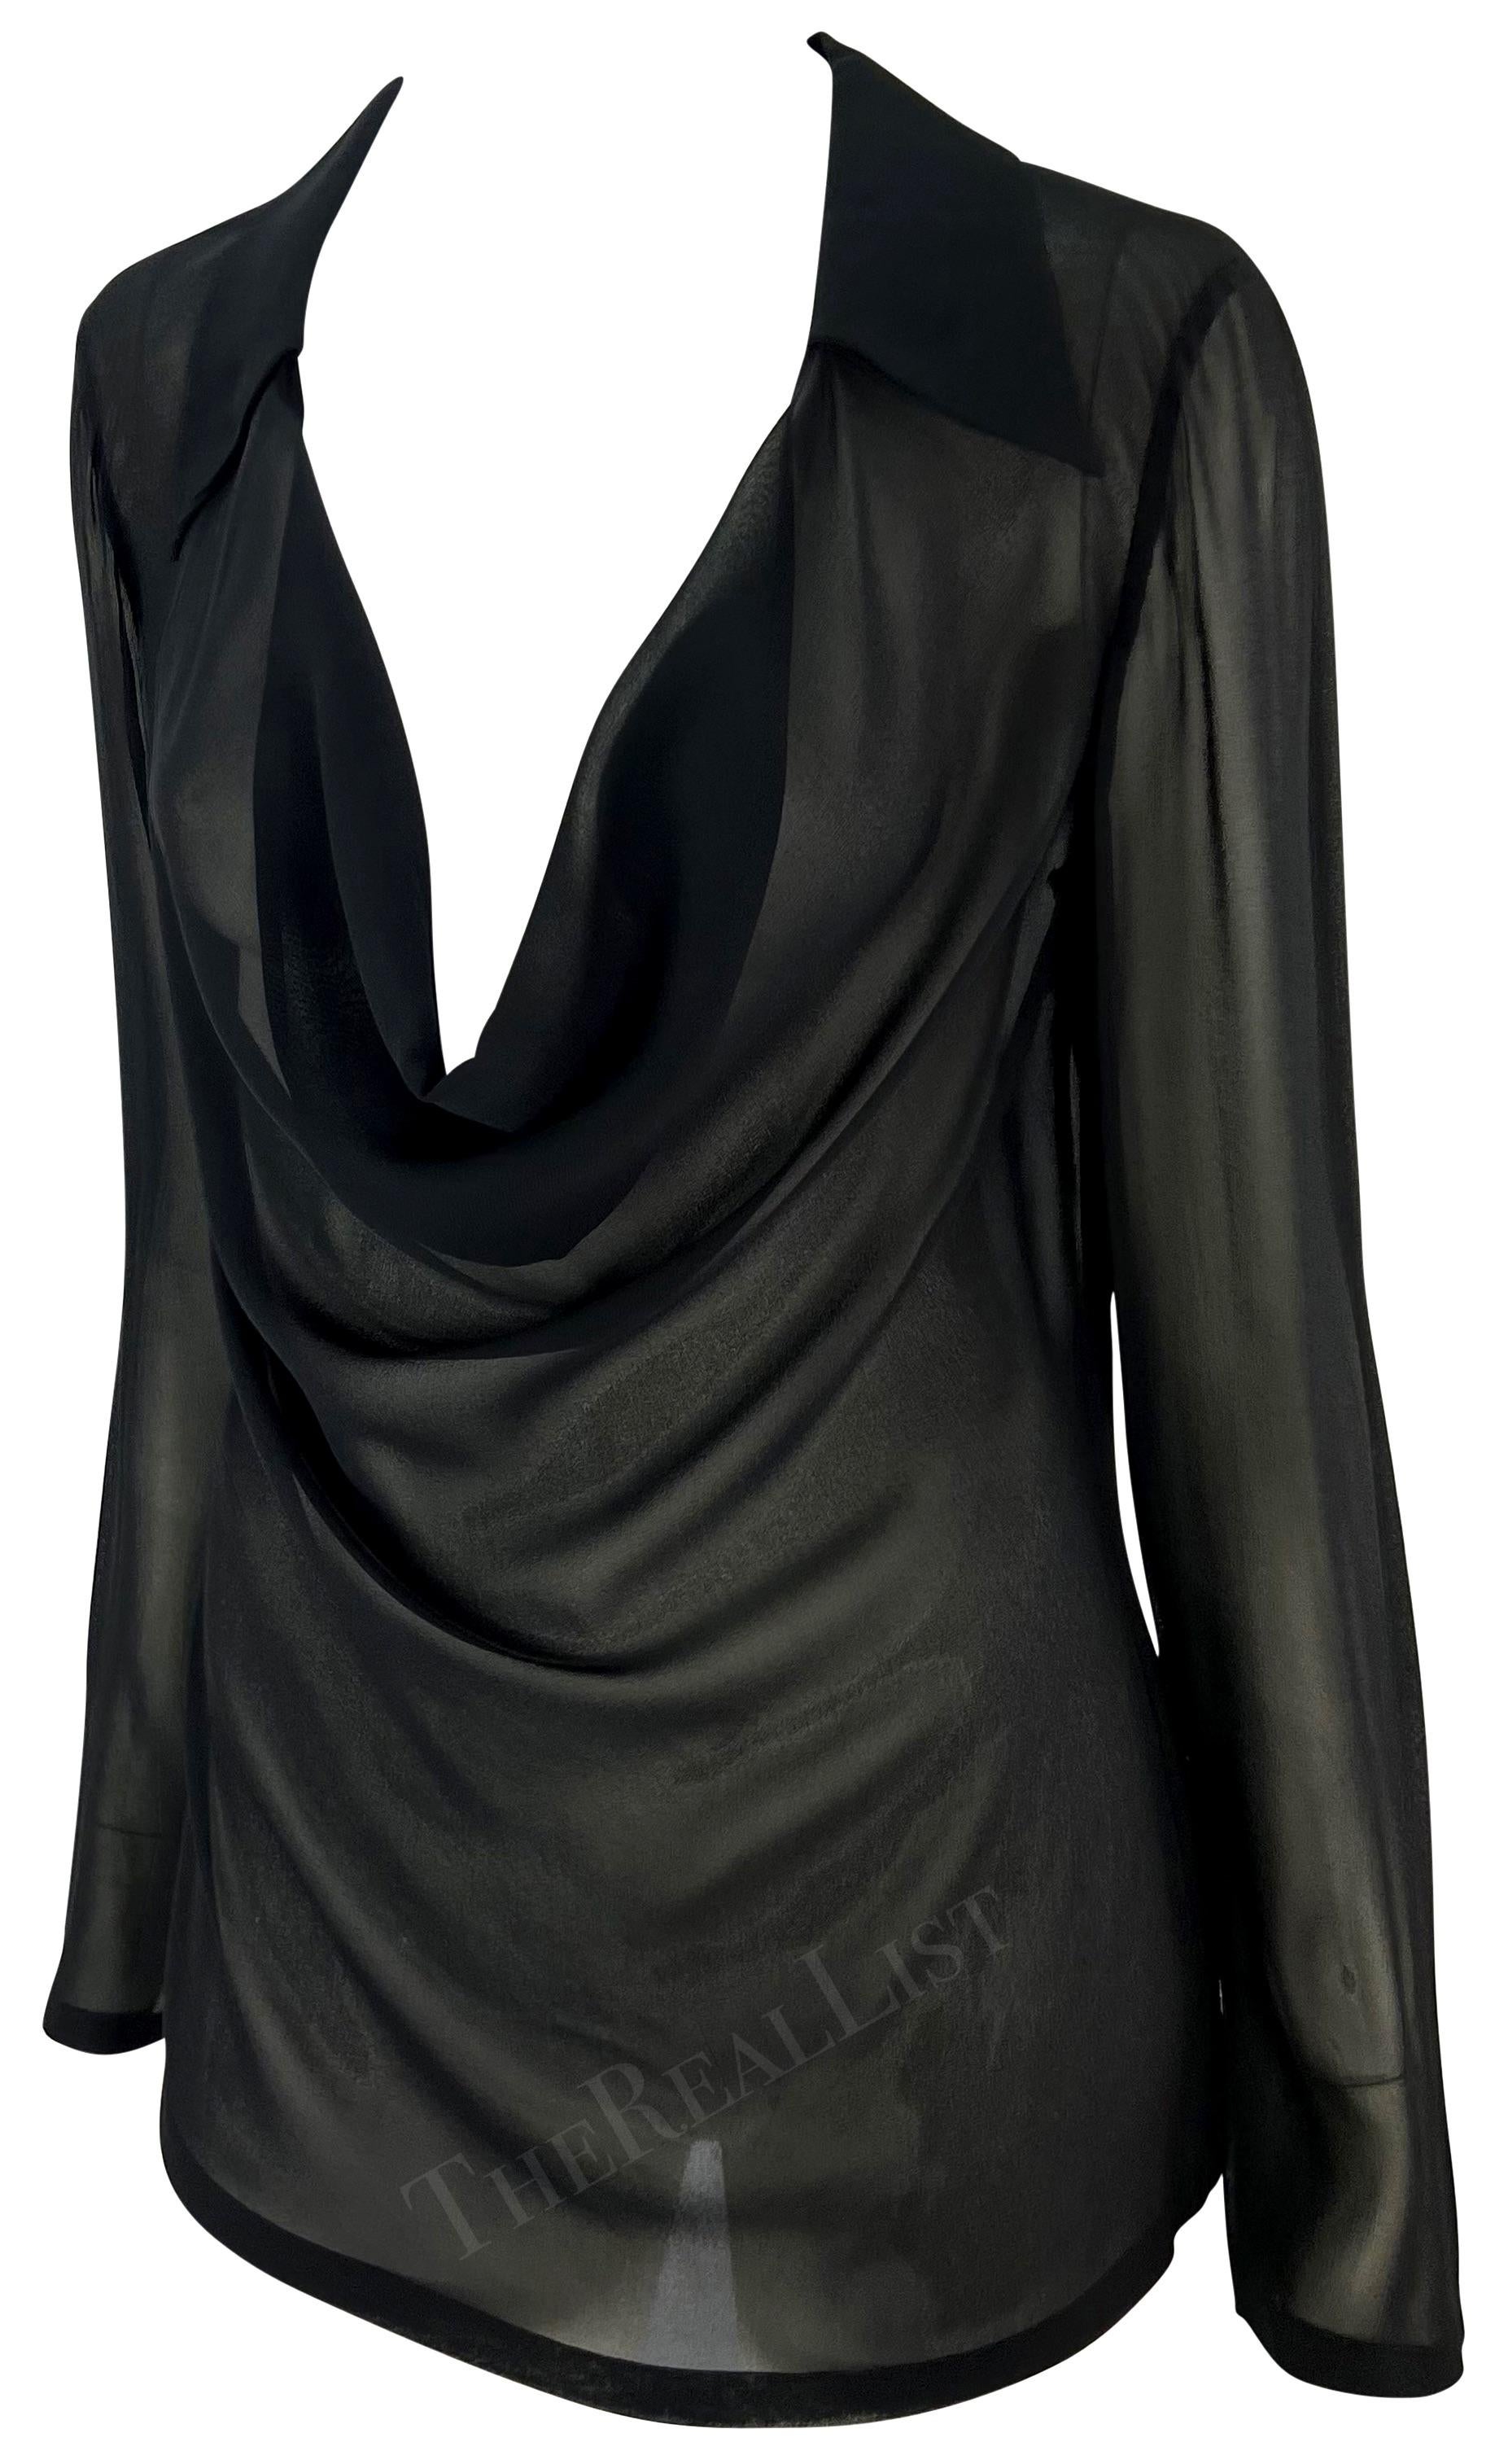 Presenting a fabulous black sheer Gucci blouse, designed by Tom Ford. From the Spring/Summer 1997 collection, this entirely sheer black top features a plunging cowl neckline, a fold-over collar, and lightly belled sleeves.

Approximate